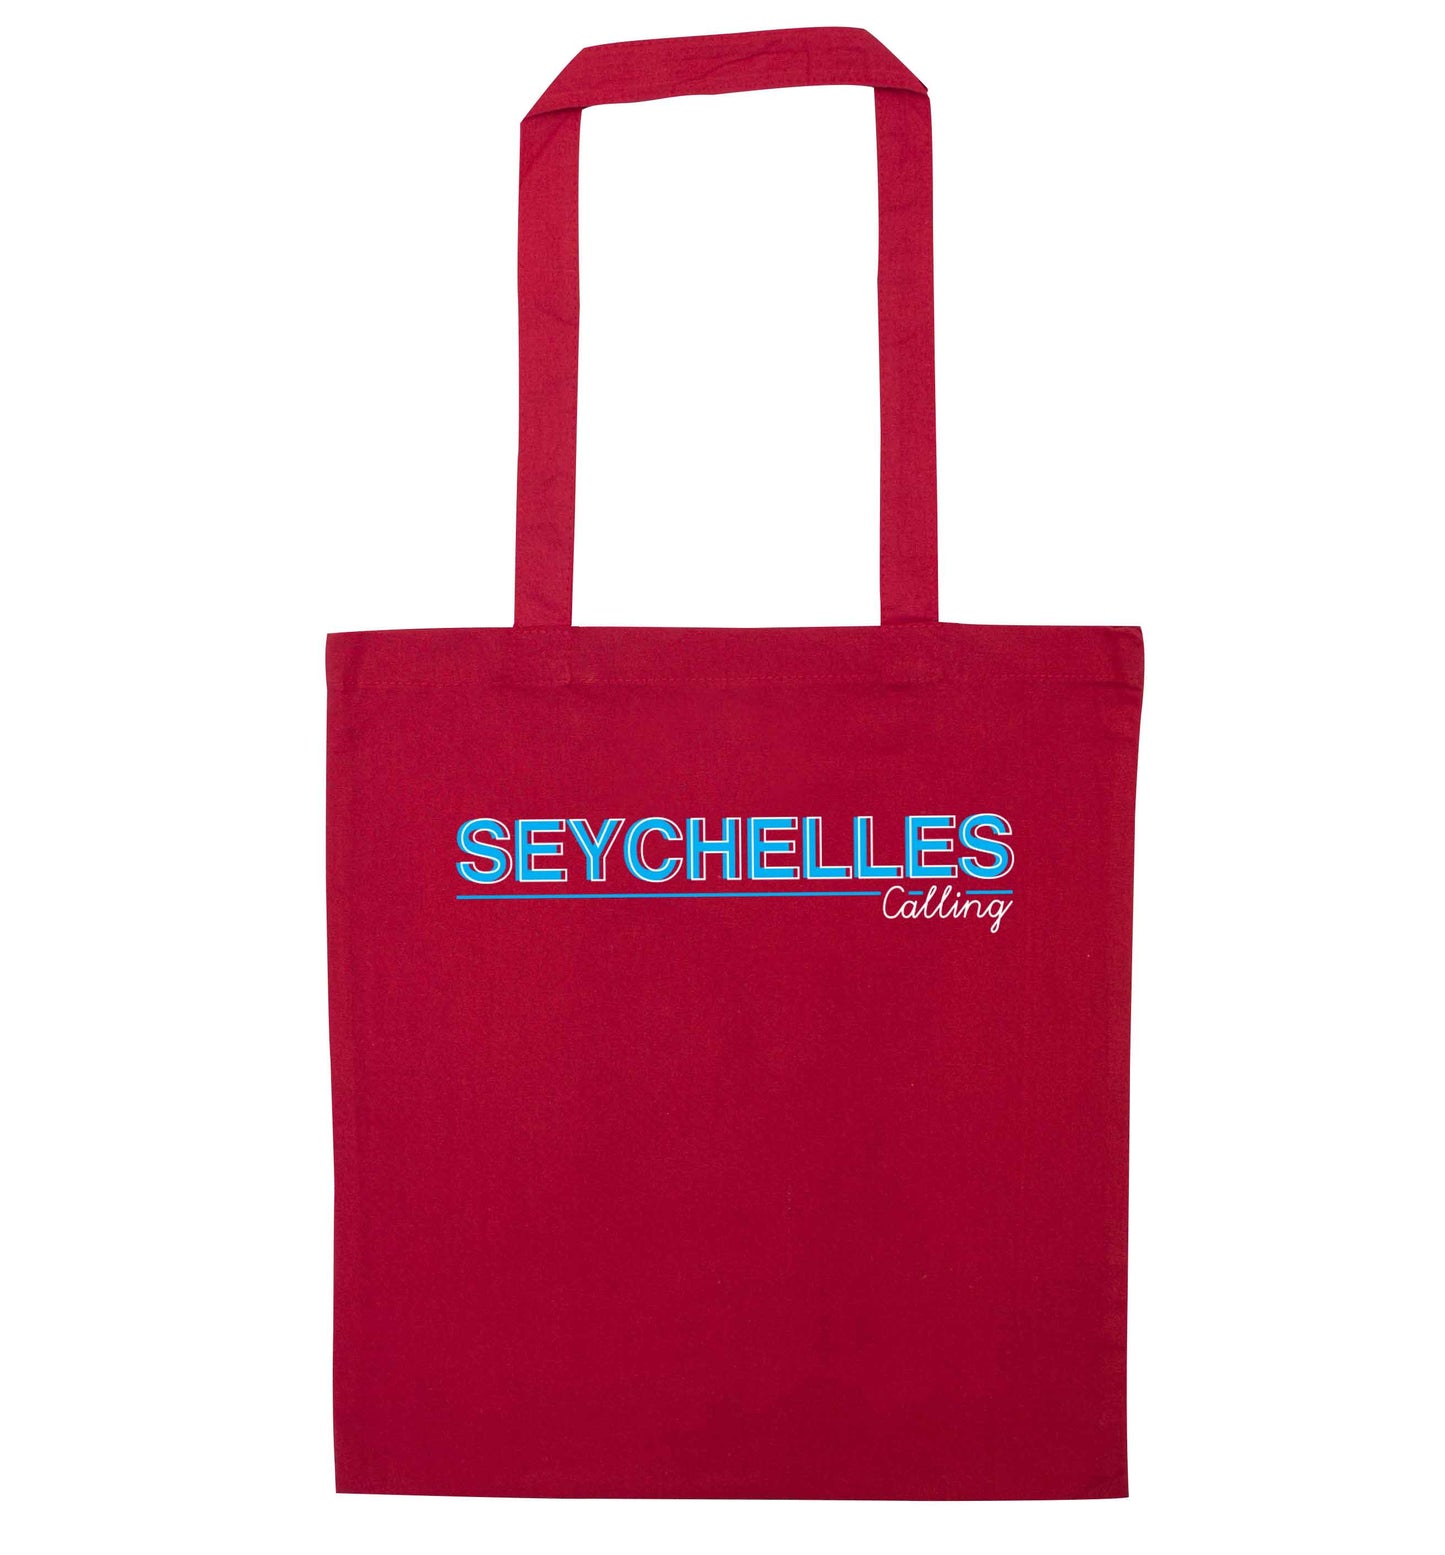 Seychelles calling red tote bag